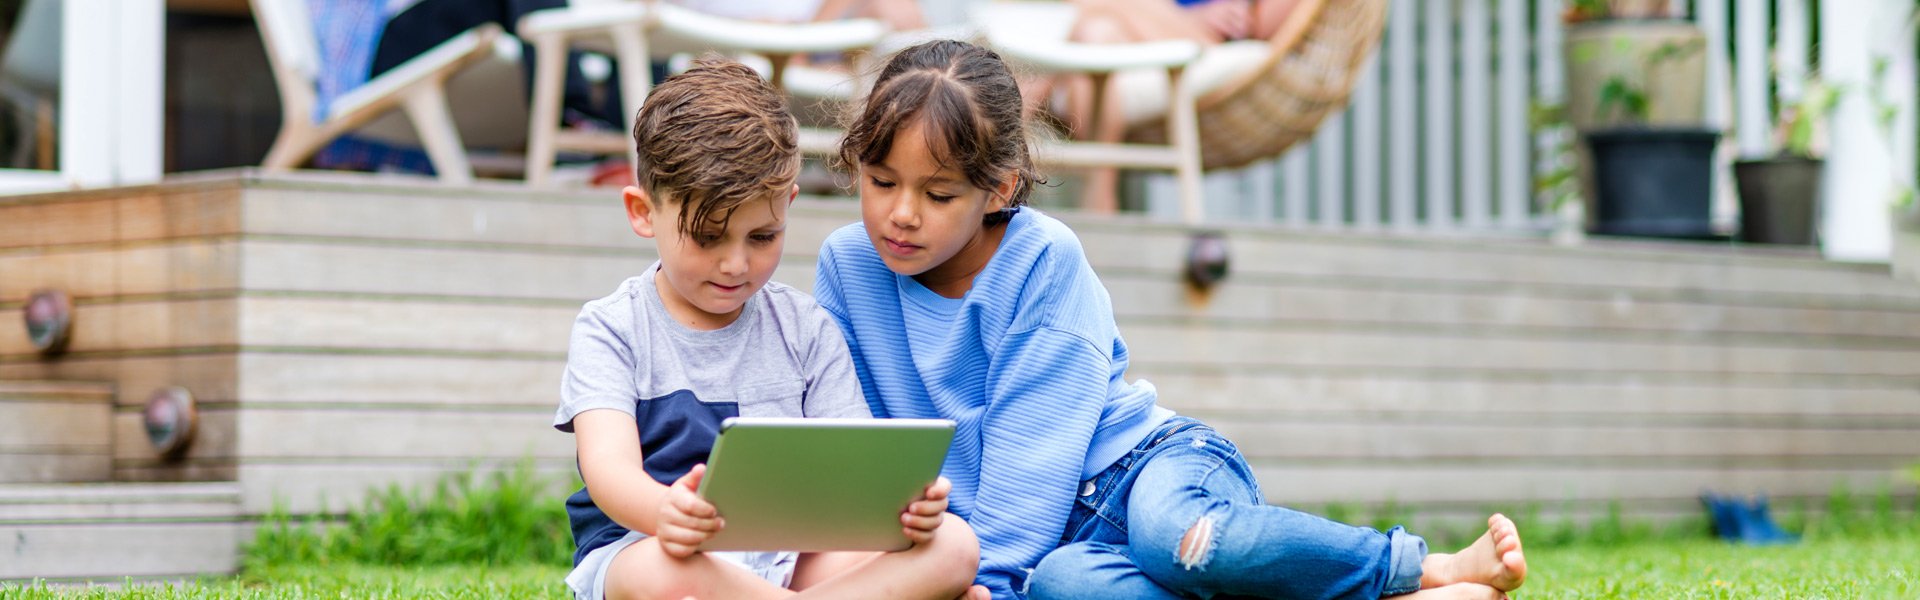 Two children viewing a tablet sitting in lawn